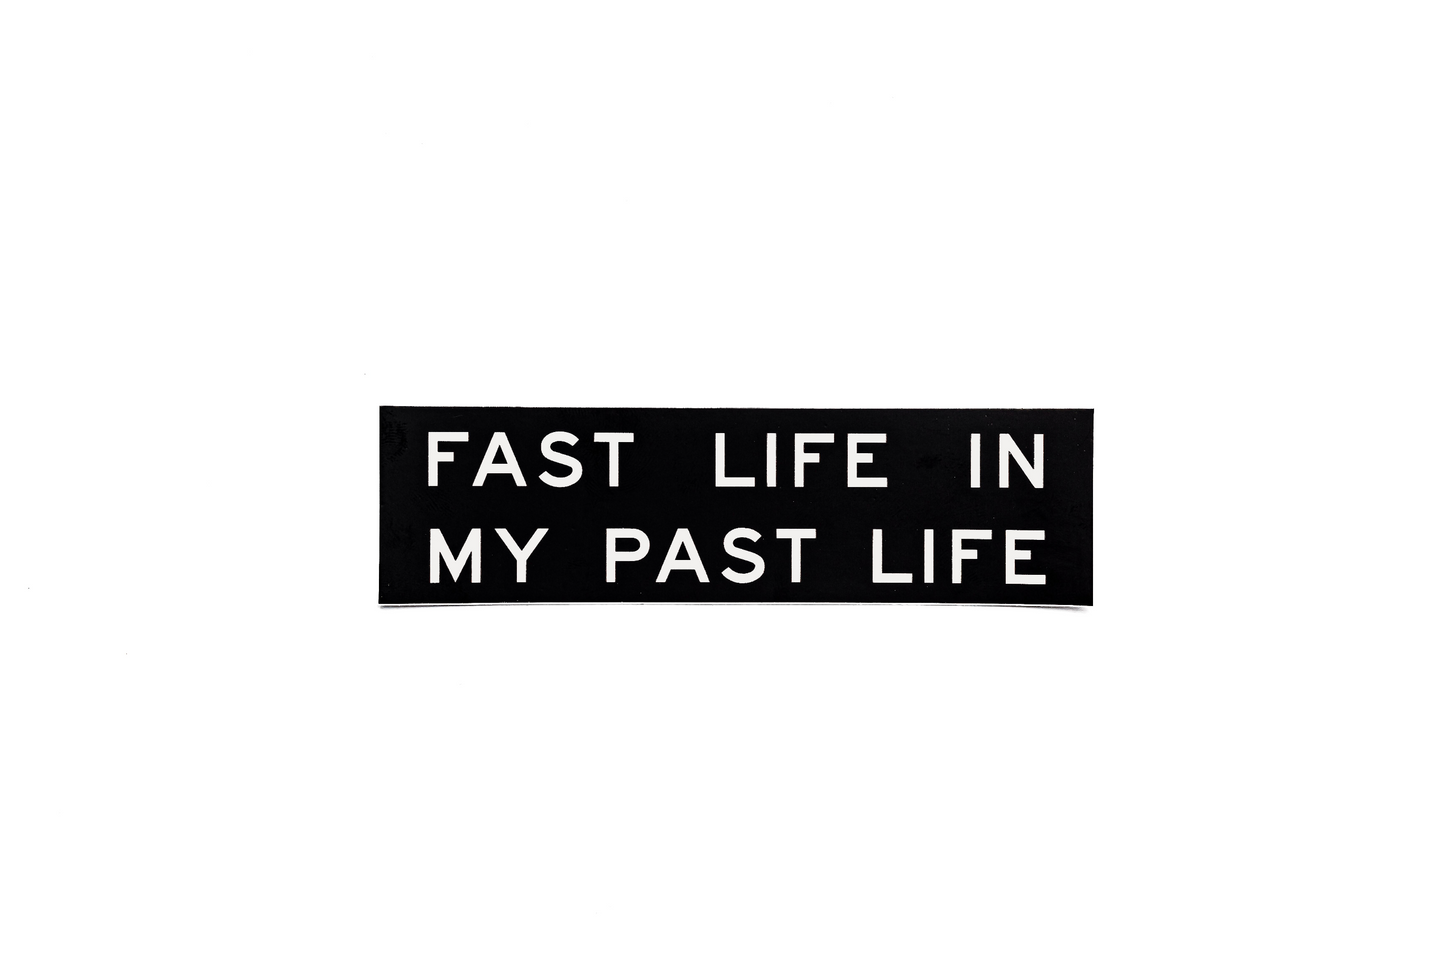 Fast Life in My Past Life